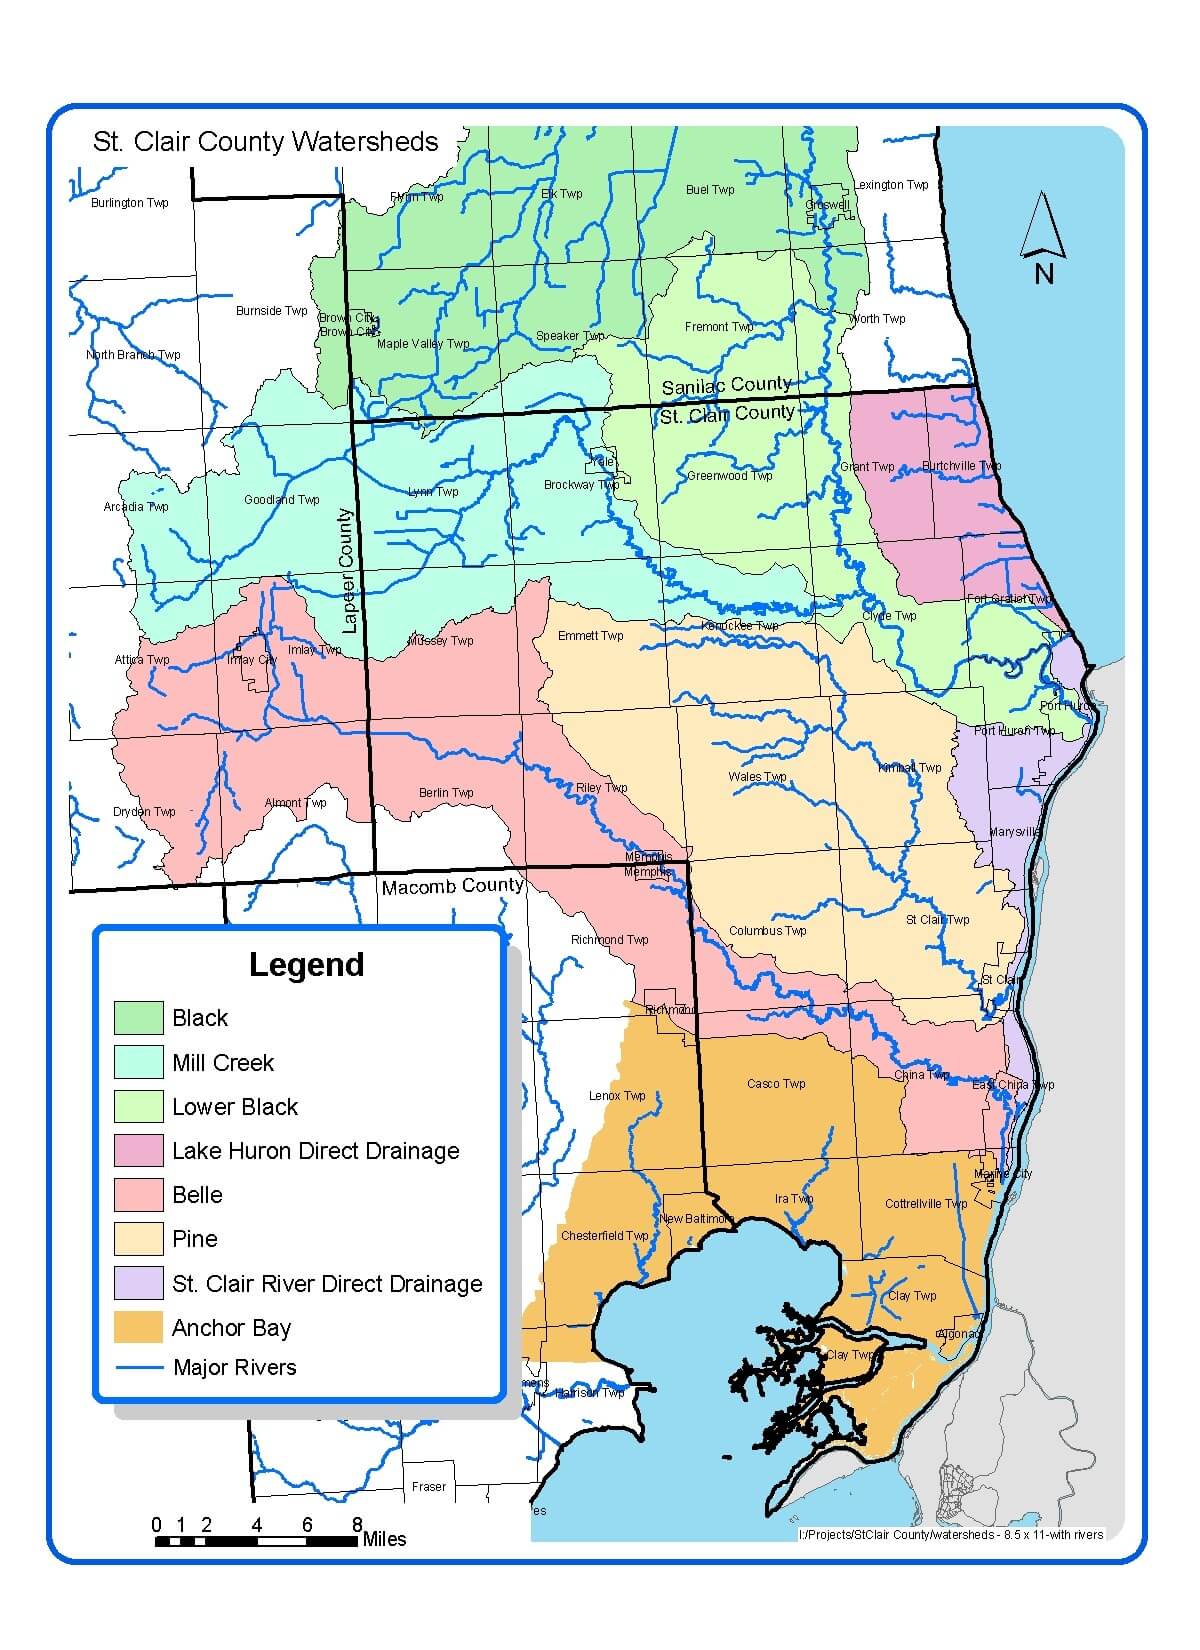 st. clair county watersheds map (2)